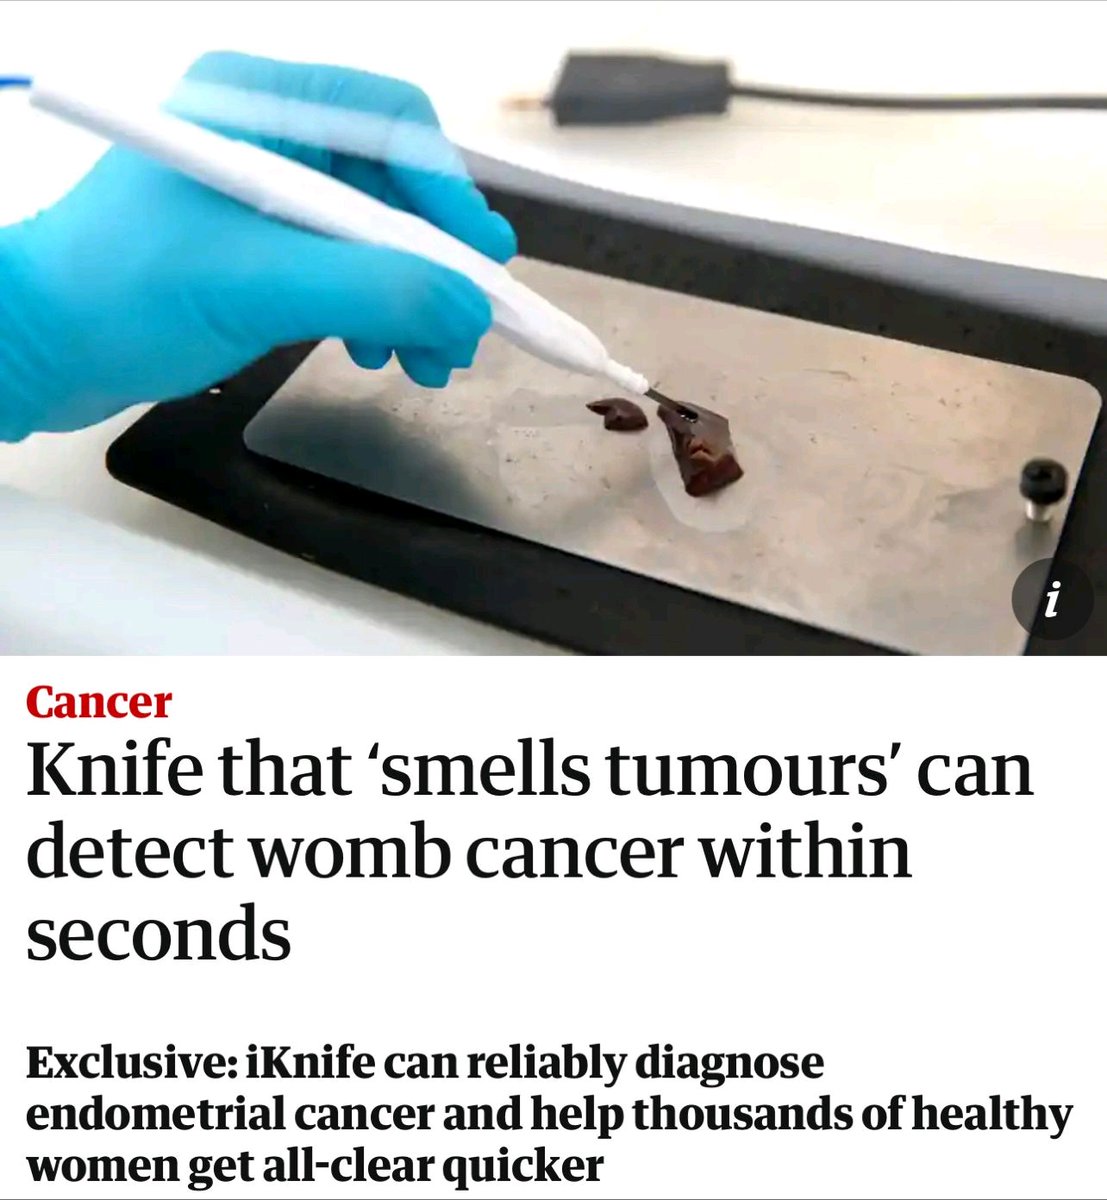 A revolutionary surgical knife discovered that sniffs tumors & diagonises #wombcancer at the wink of an eye! This discovery will enable women getting all clear quickly. Thanks to reseacher.